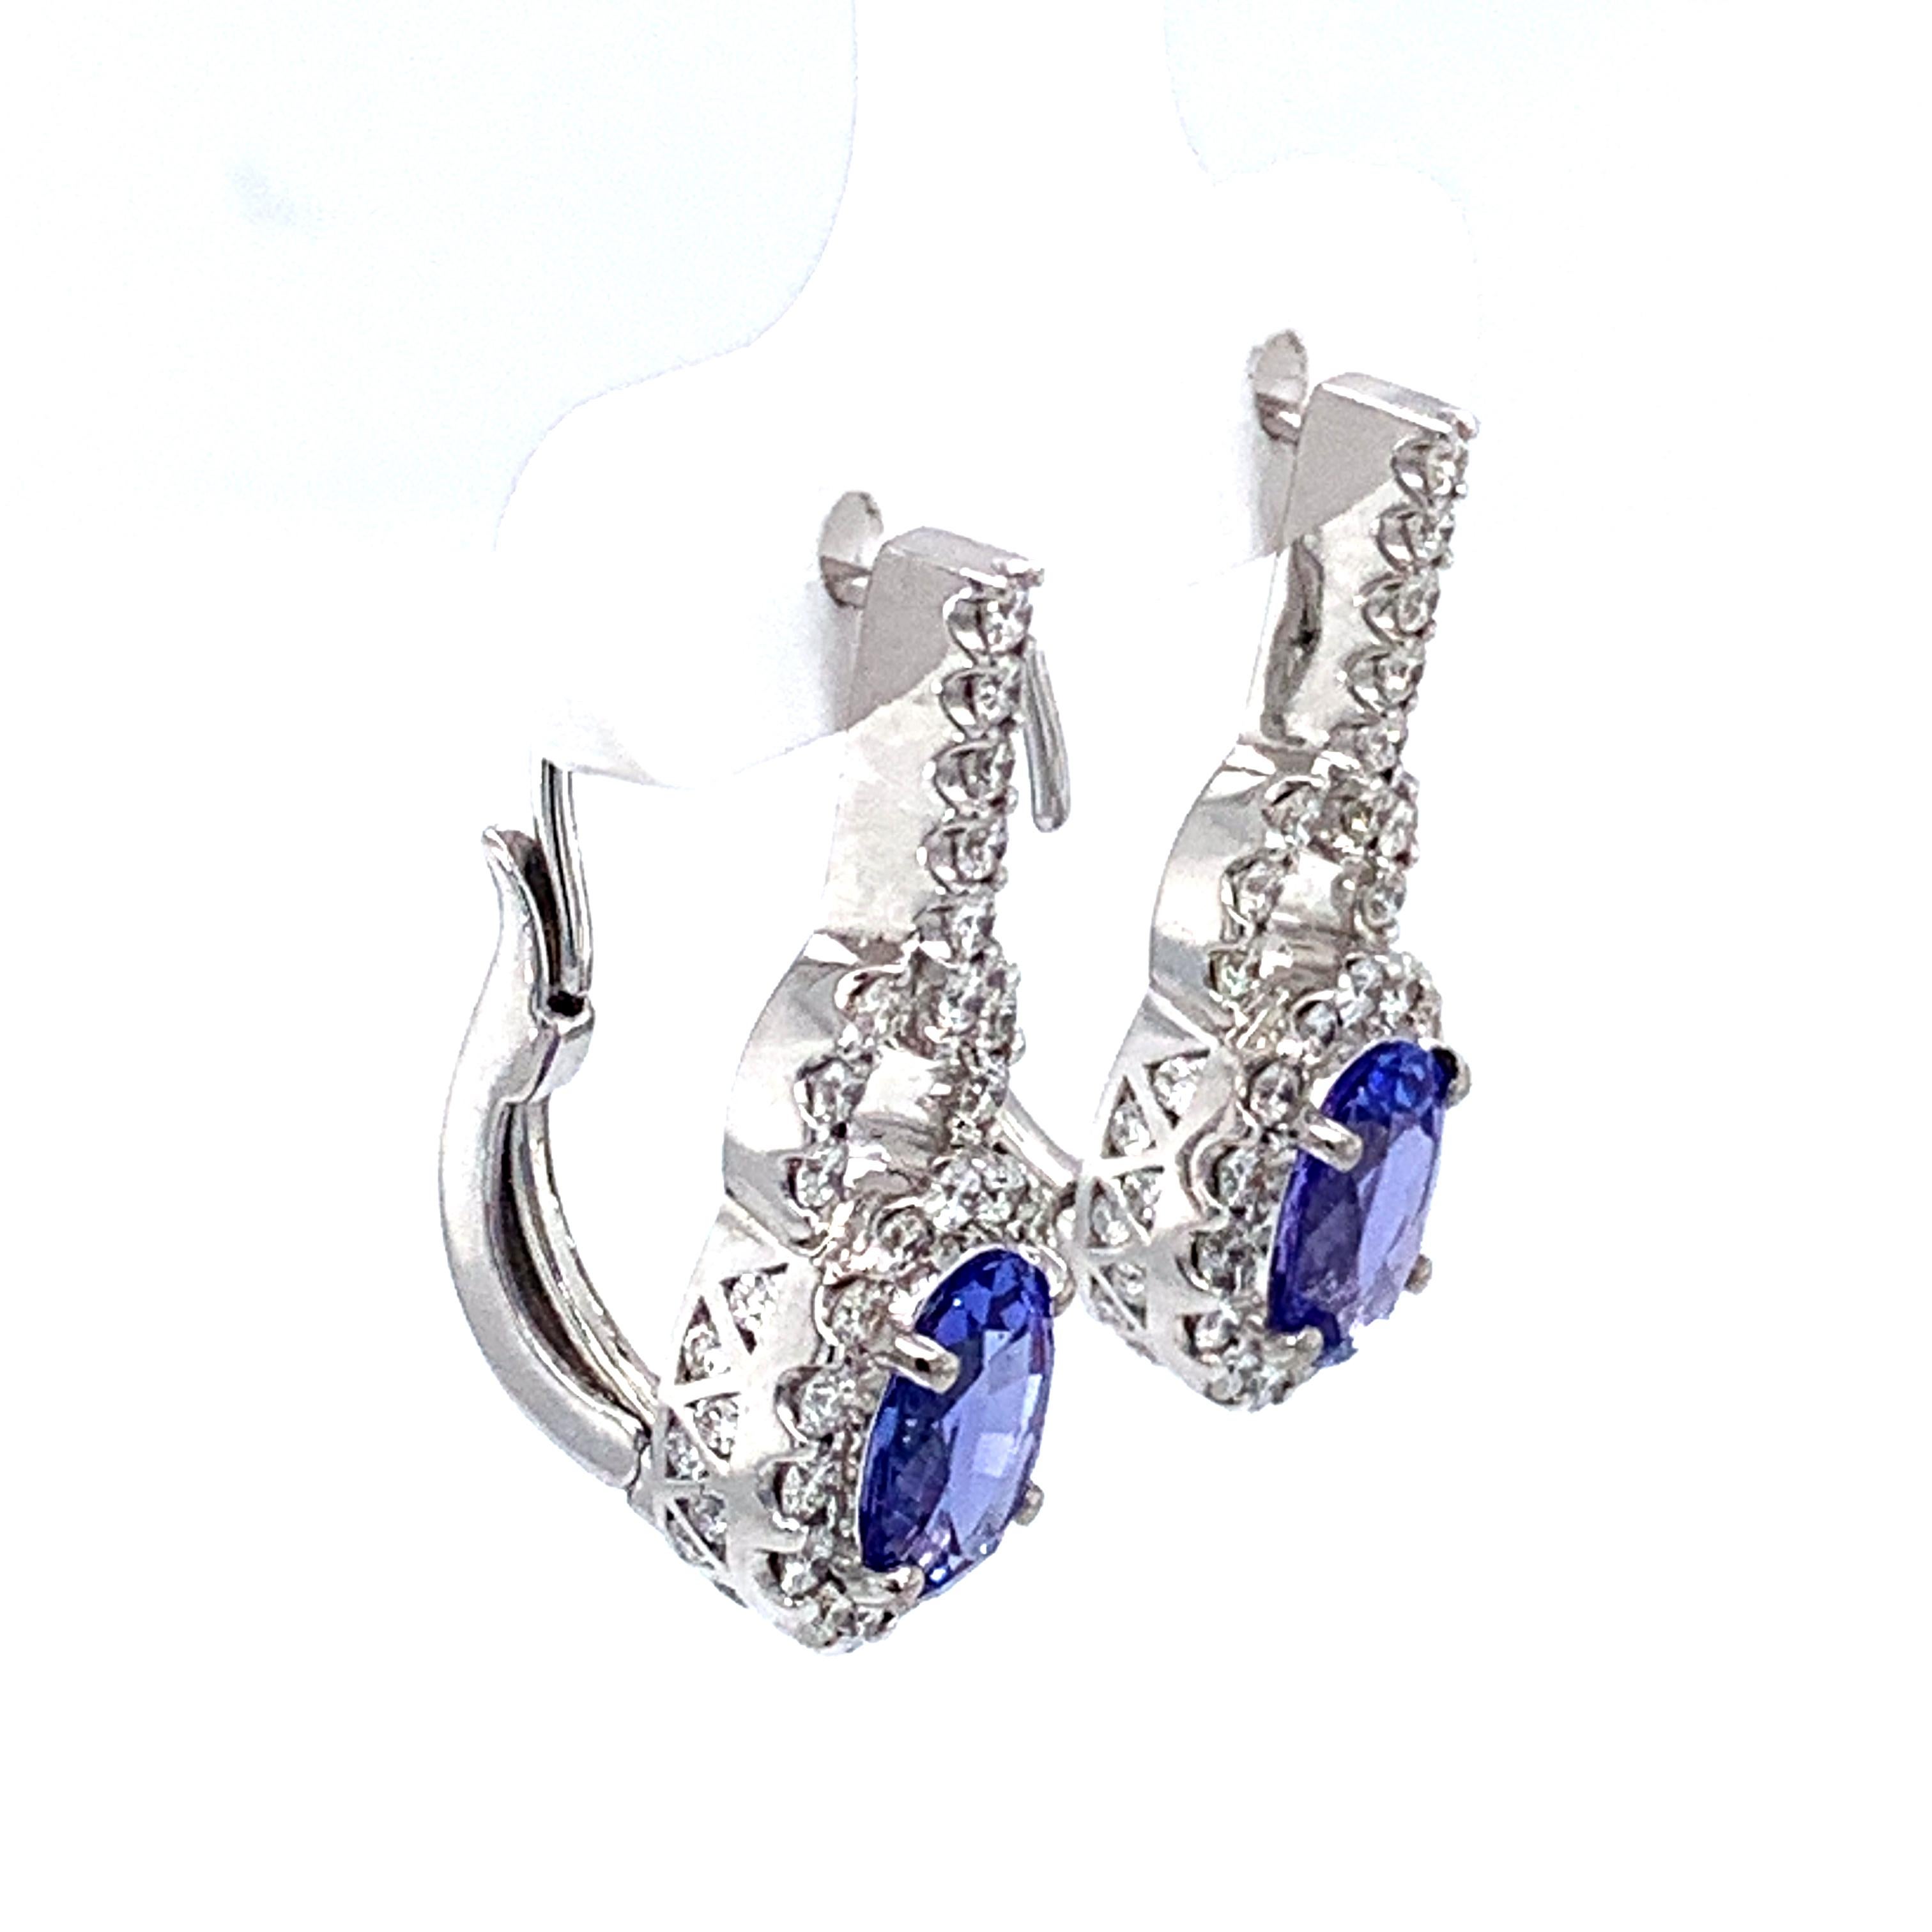 Stunning 1.47 carat weight oval tanzanite hanging earrings surrounded by white diamonds 1.36 carat in weight FG color VS1 clarity.